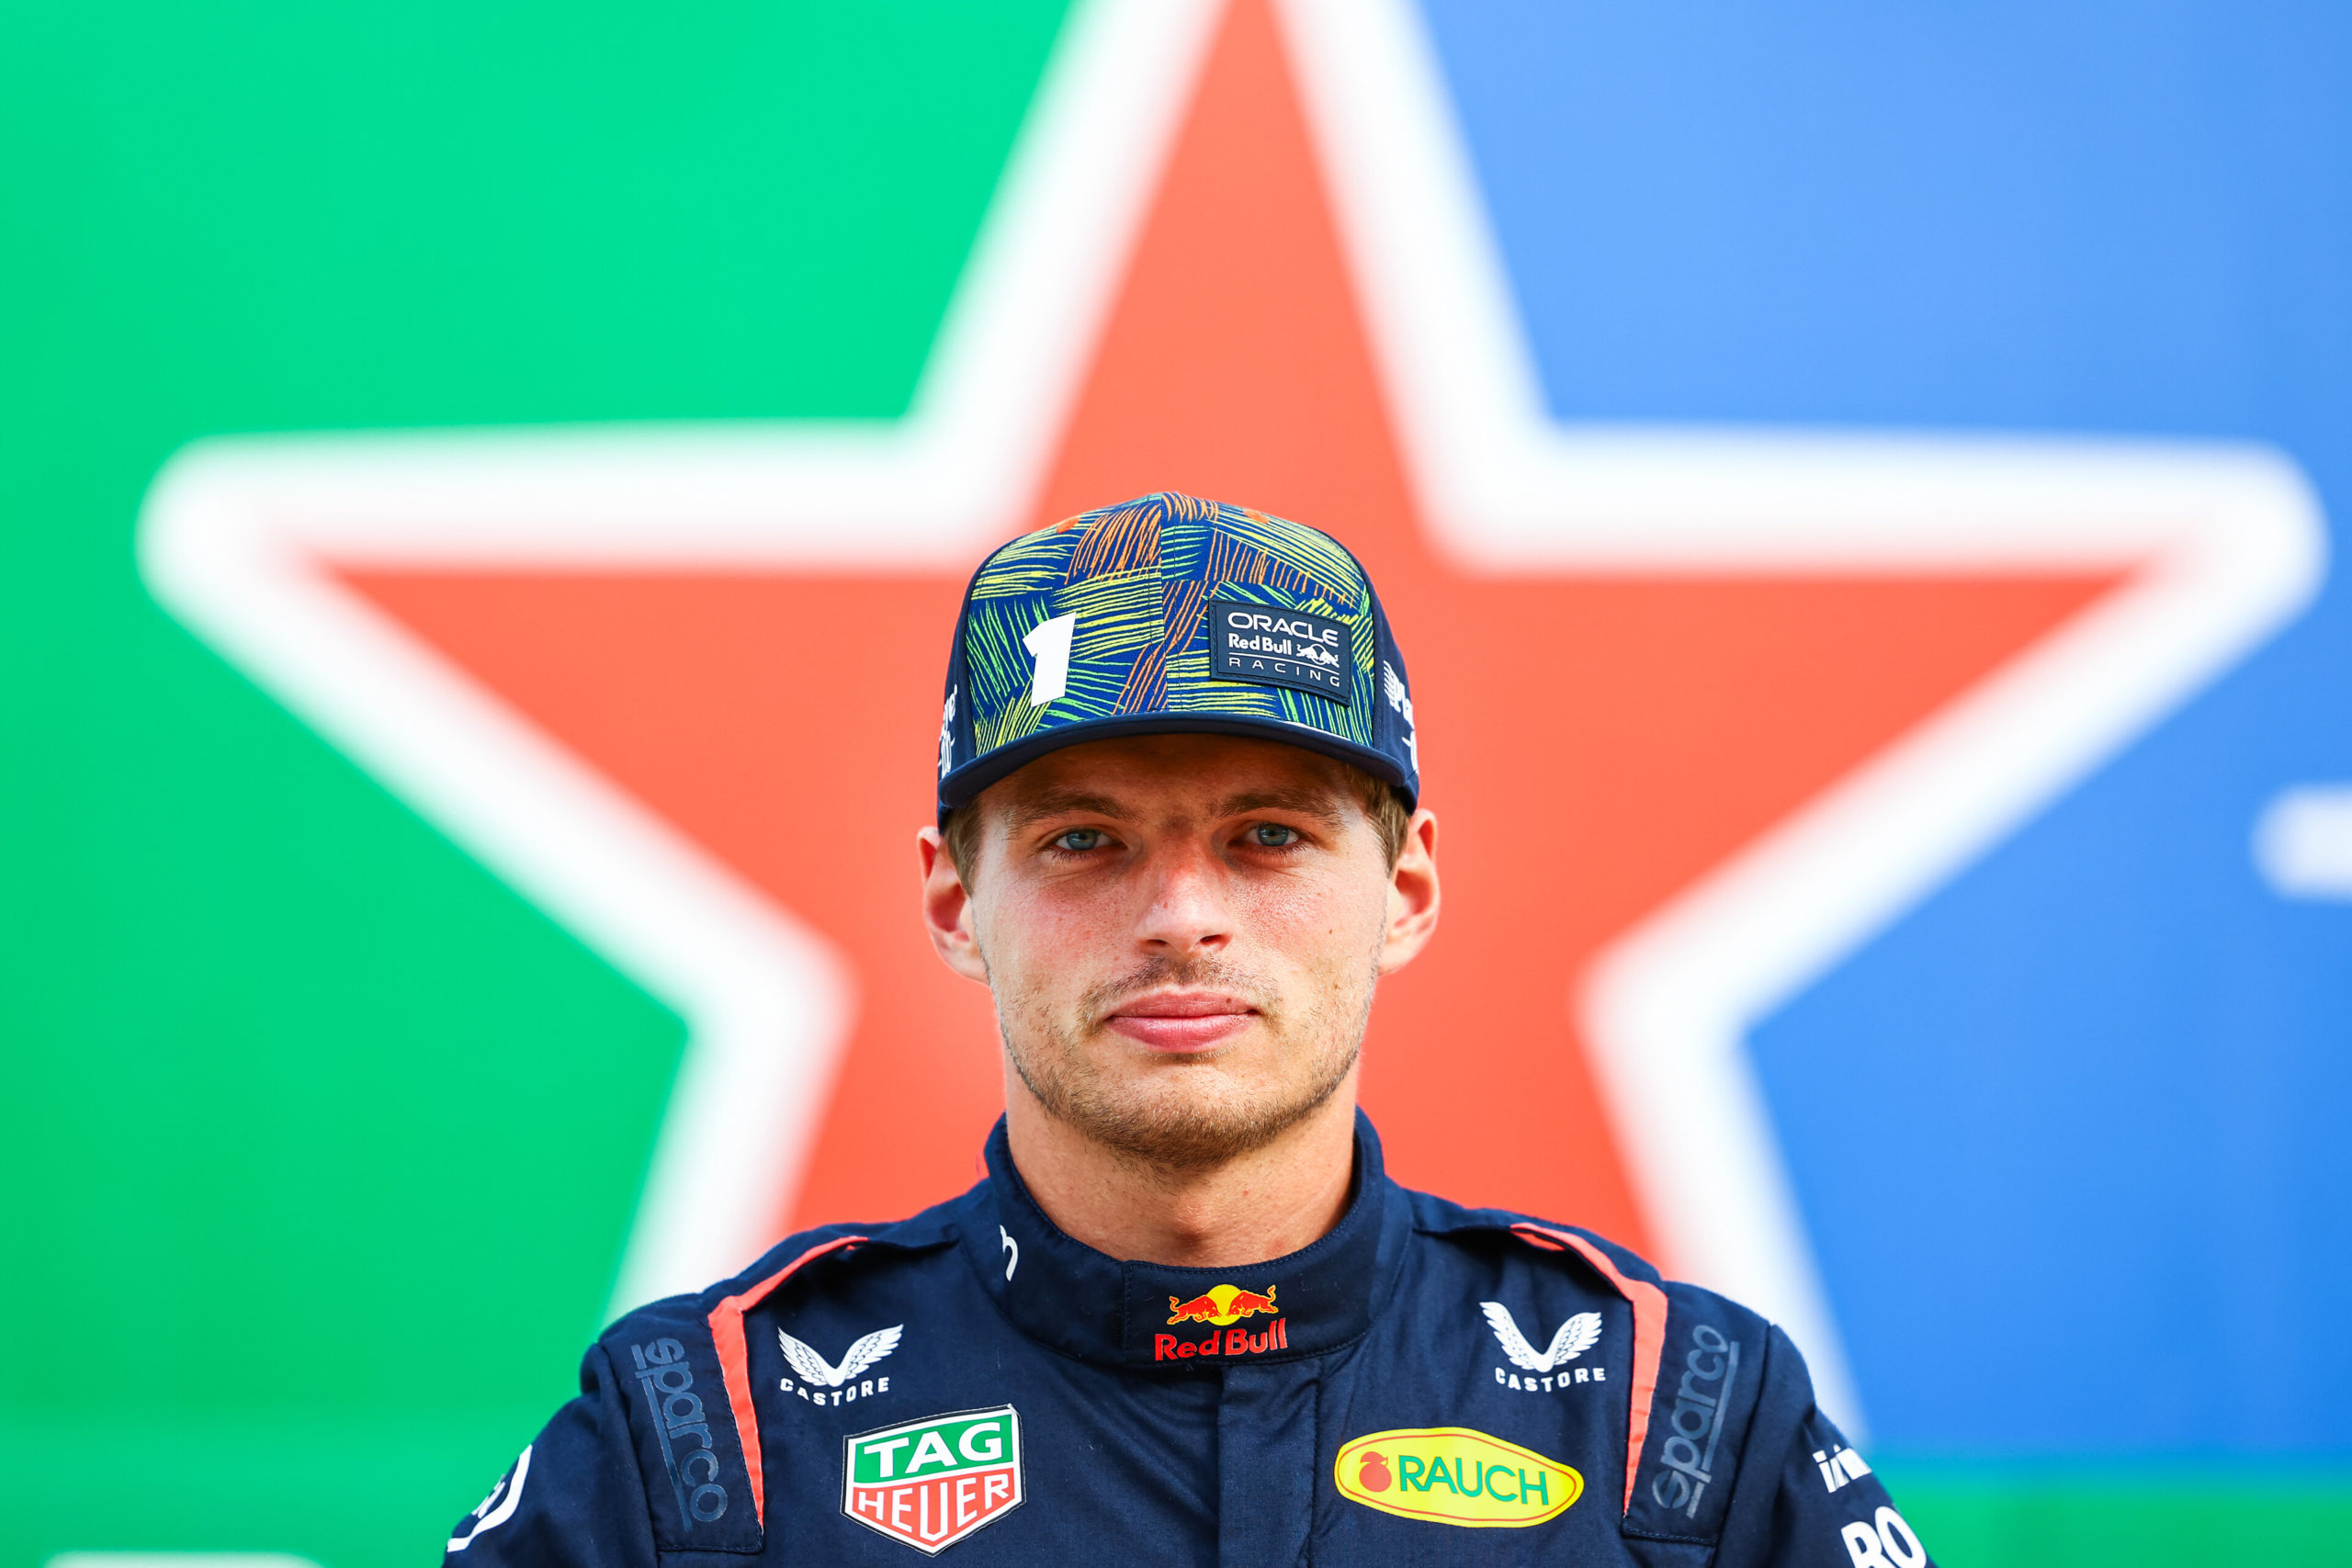 is there anyone who could beat verstappen in this red bull?